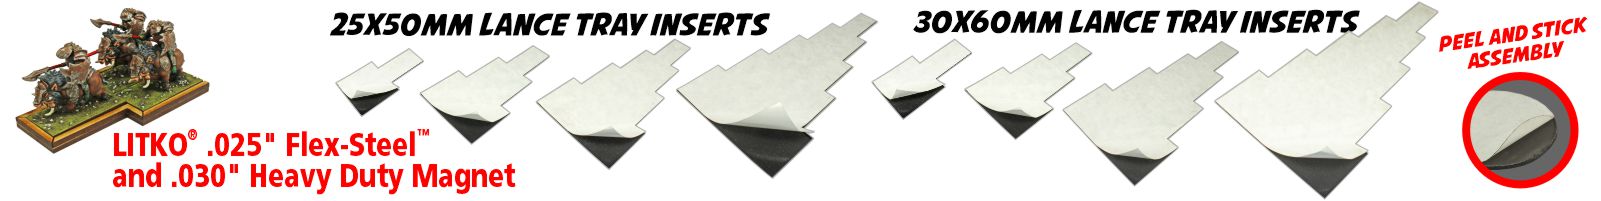 Flexible Steel Inserts for Lance Trays